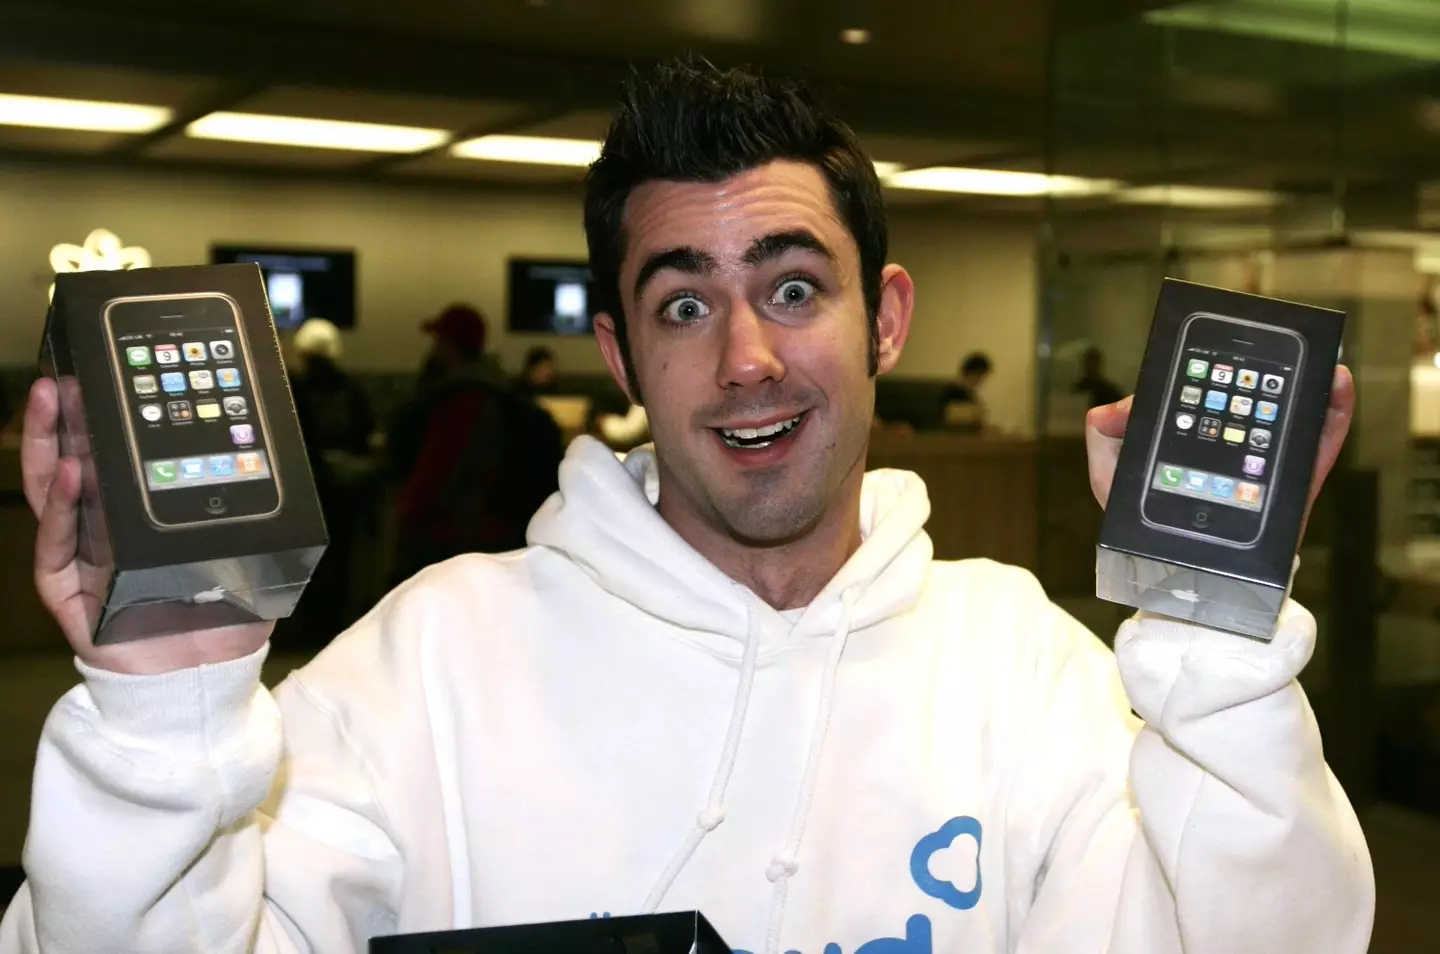 One happy punter with not one but TWO original iPhones in 2007.